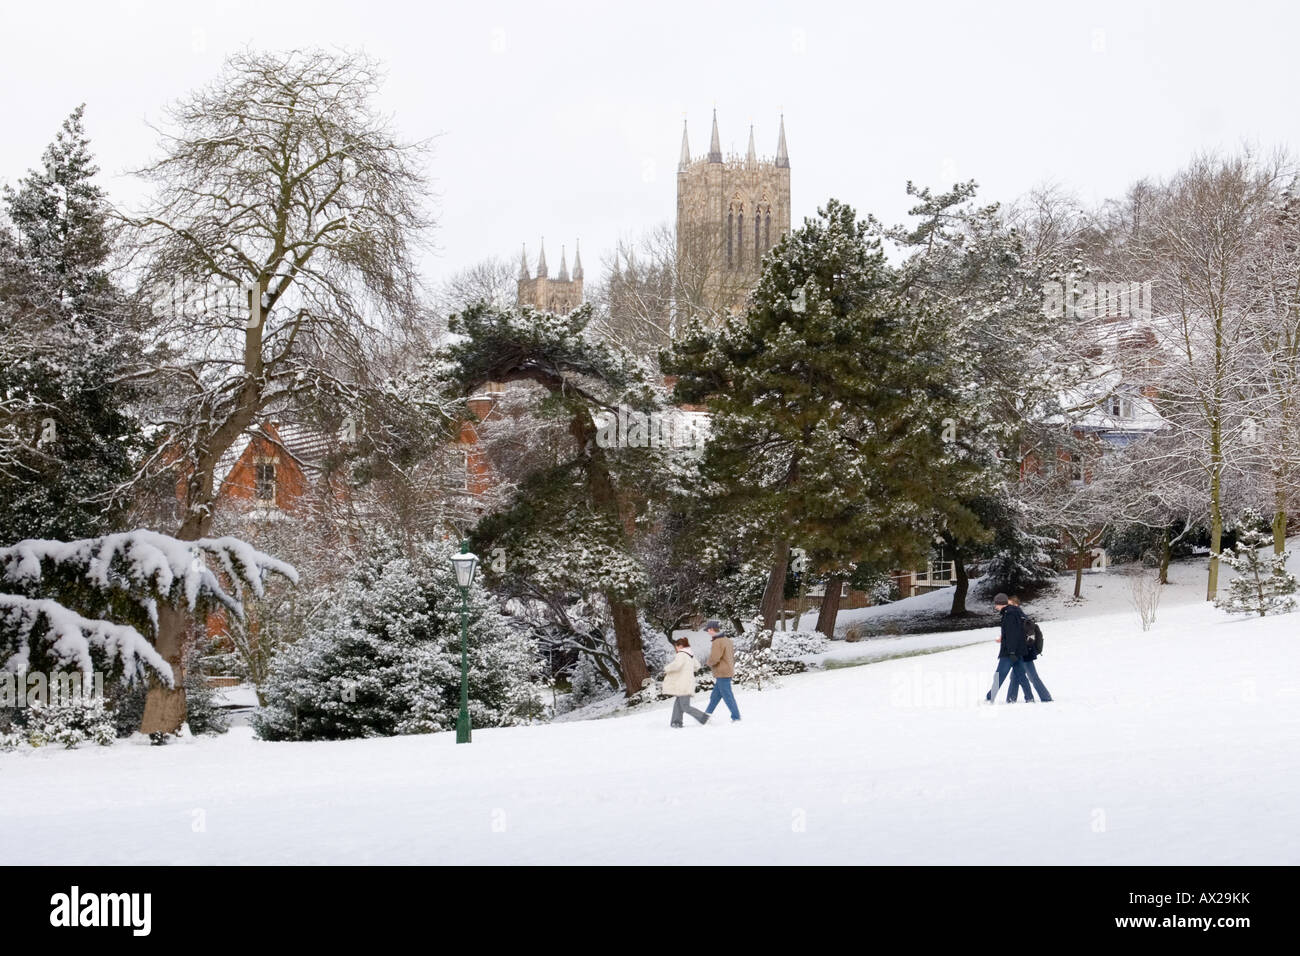 View of Lincoln cathedral from the Arboretum on a snowy winter day with people walking past Stock Photo